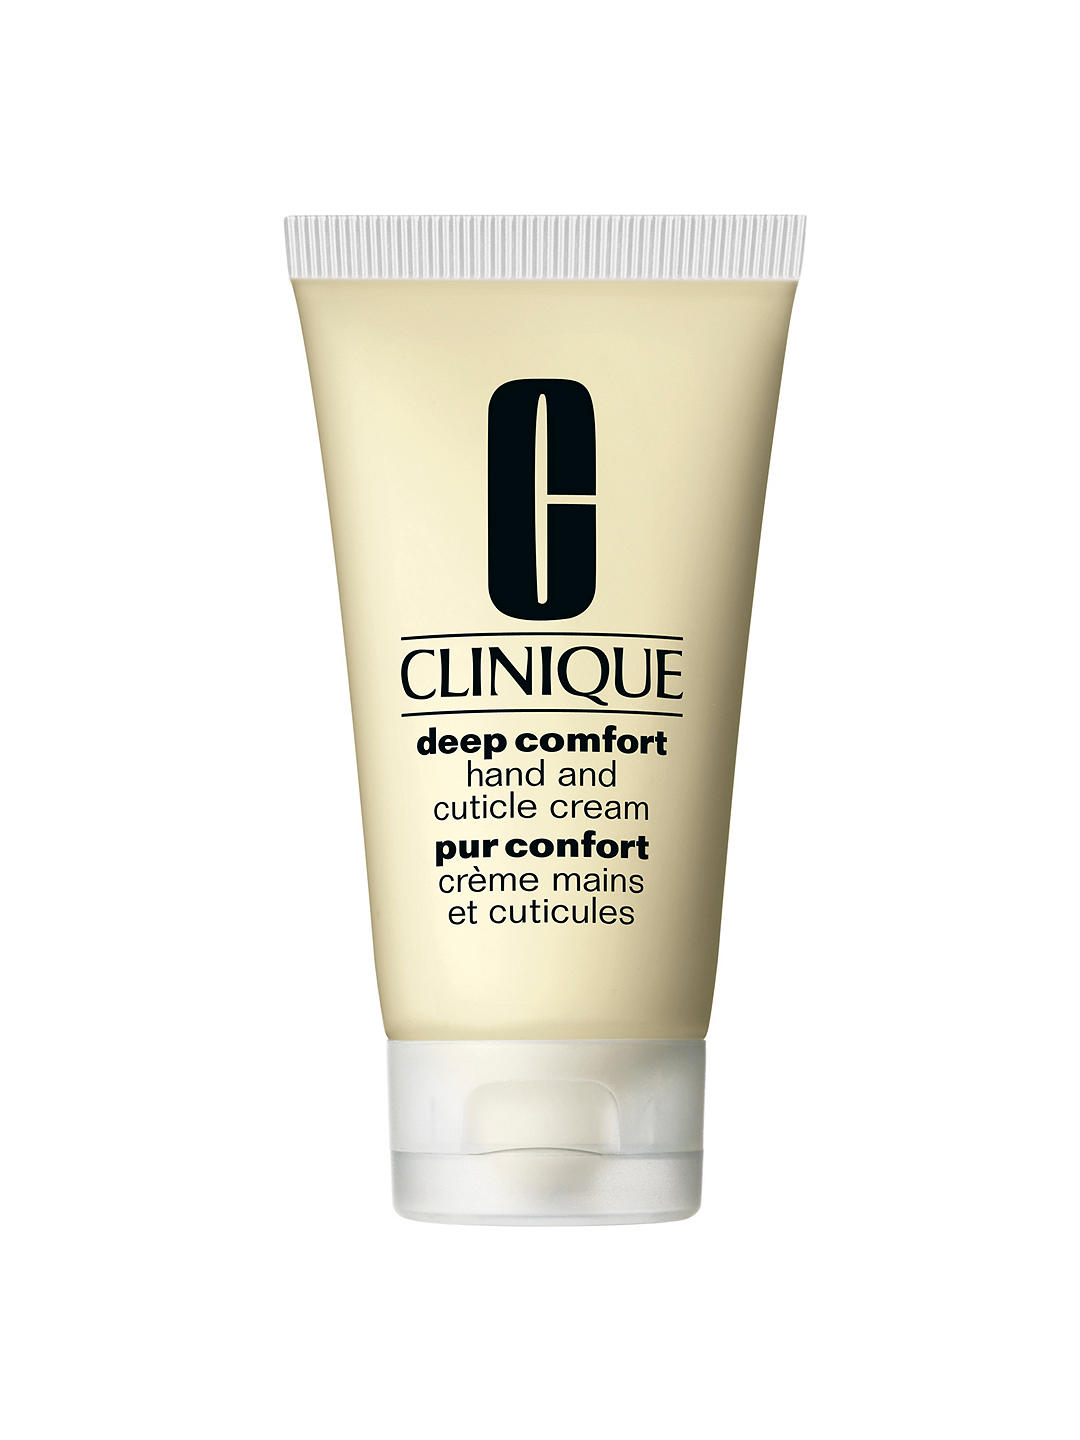 Clinique Deep Comfort Hand and Cuticle Cream 1